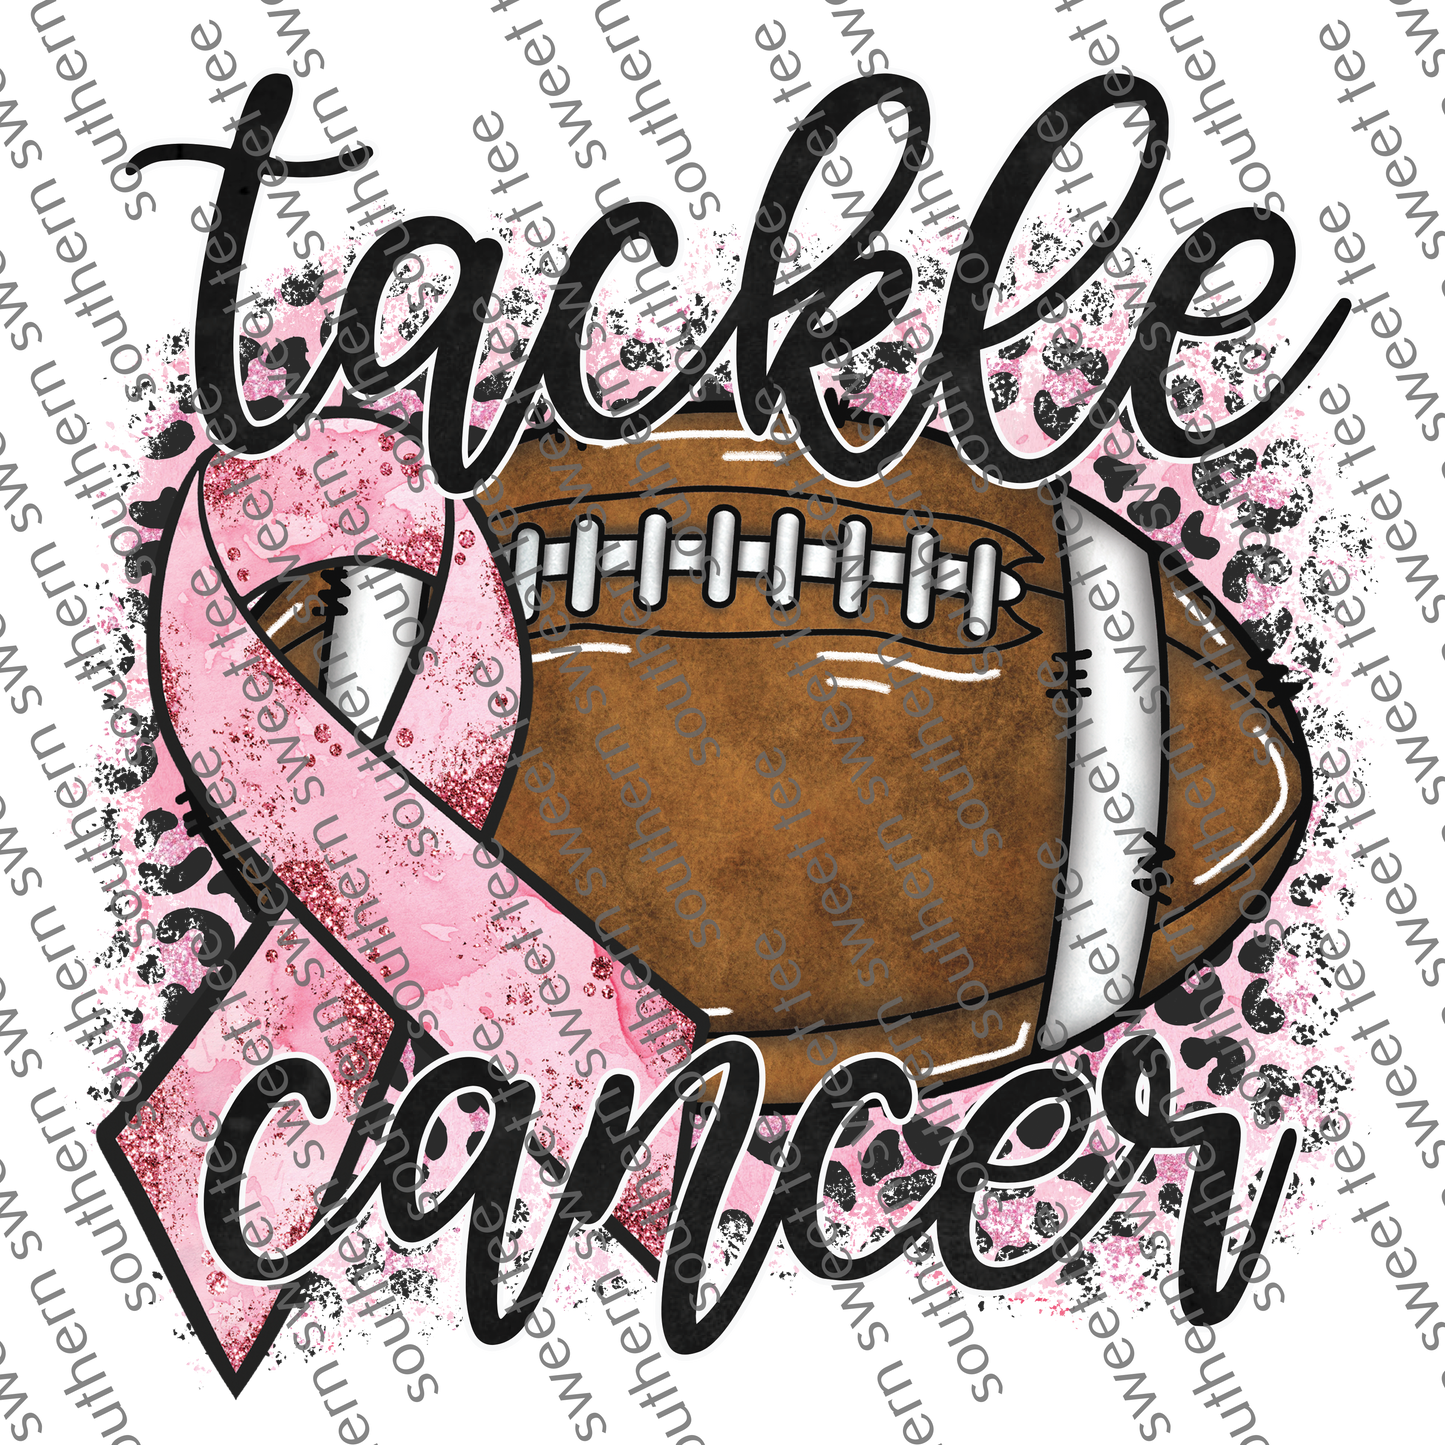 tackle breast cancer .bnb